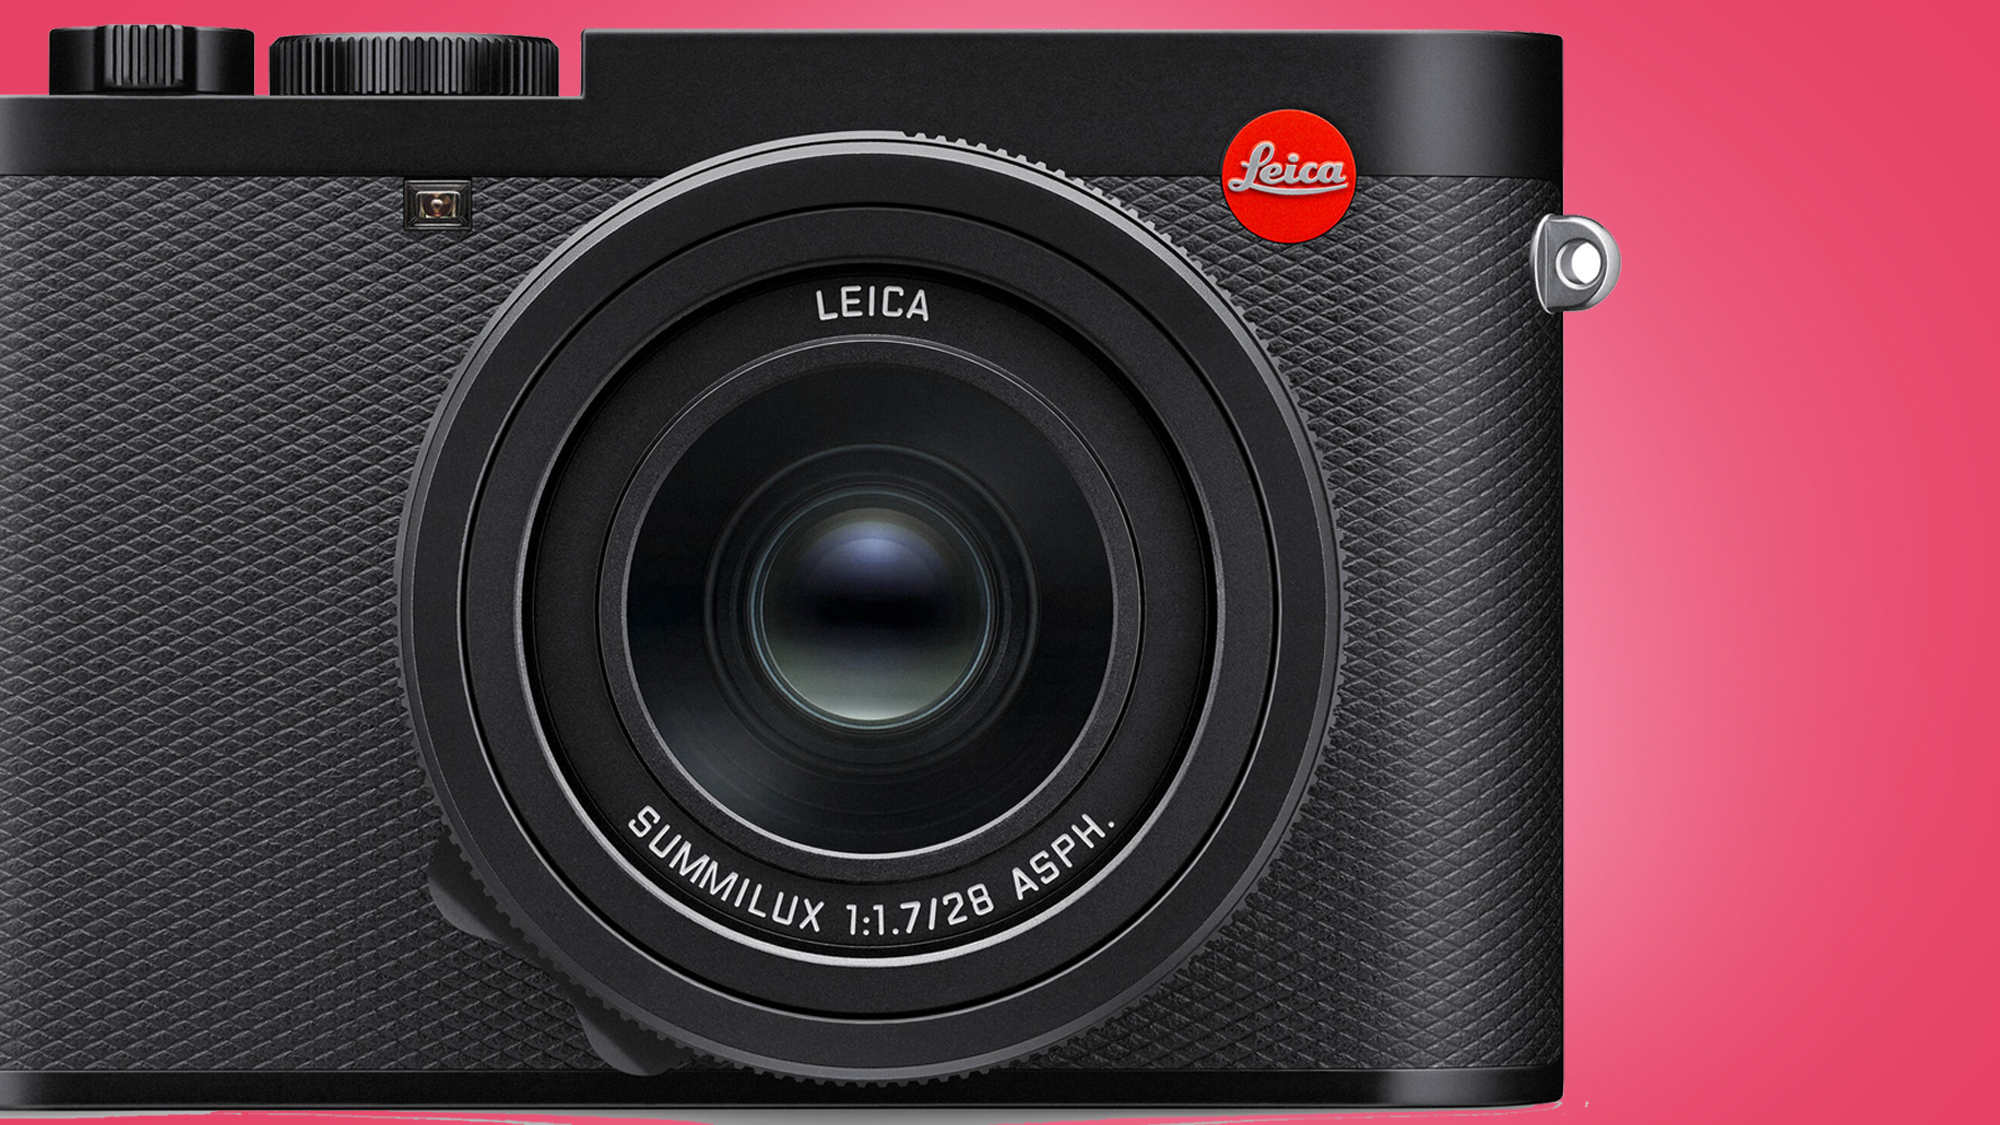 The Leica Q3 camera on a pink background